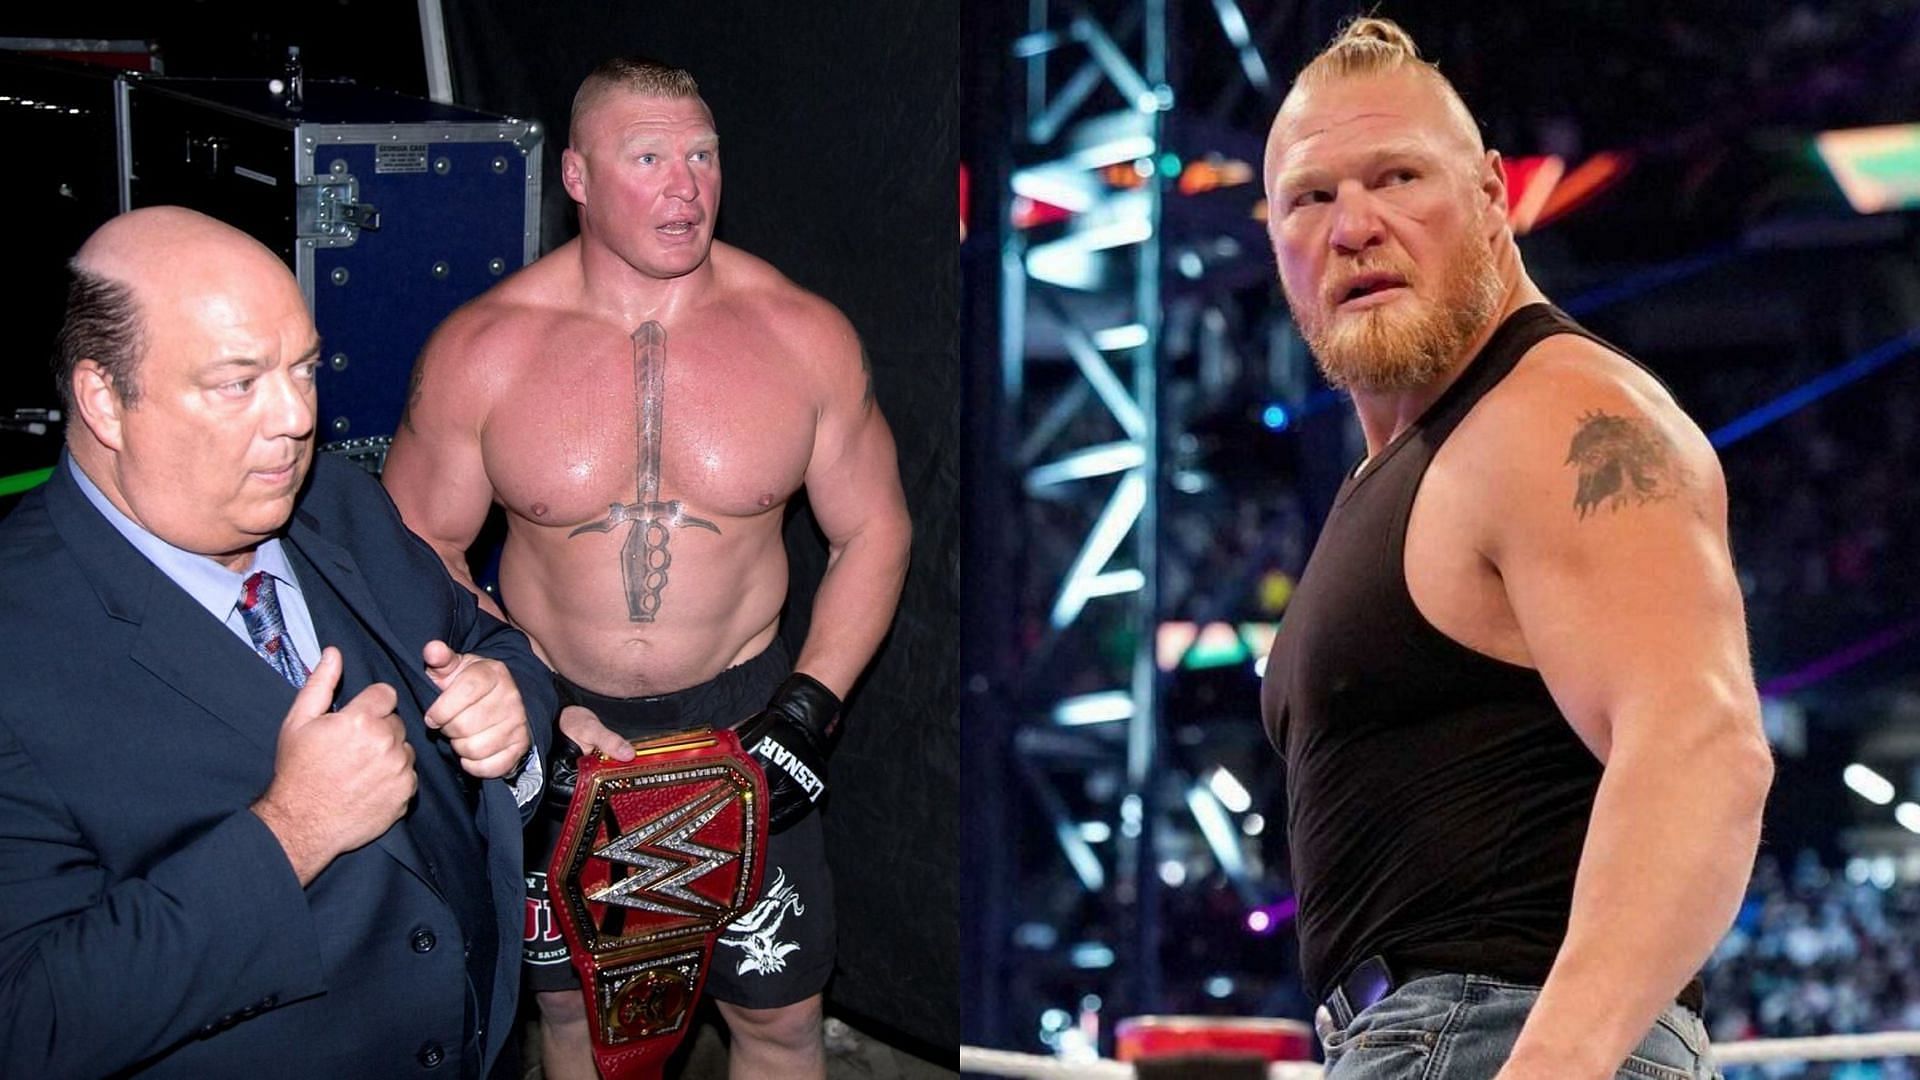 Brock Lesnar is a multi-time world champion